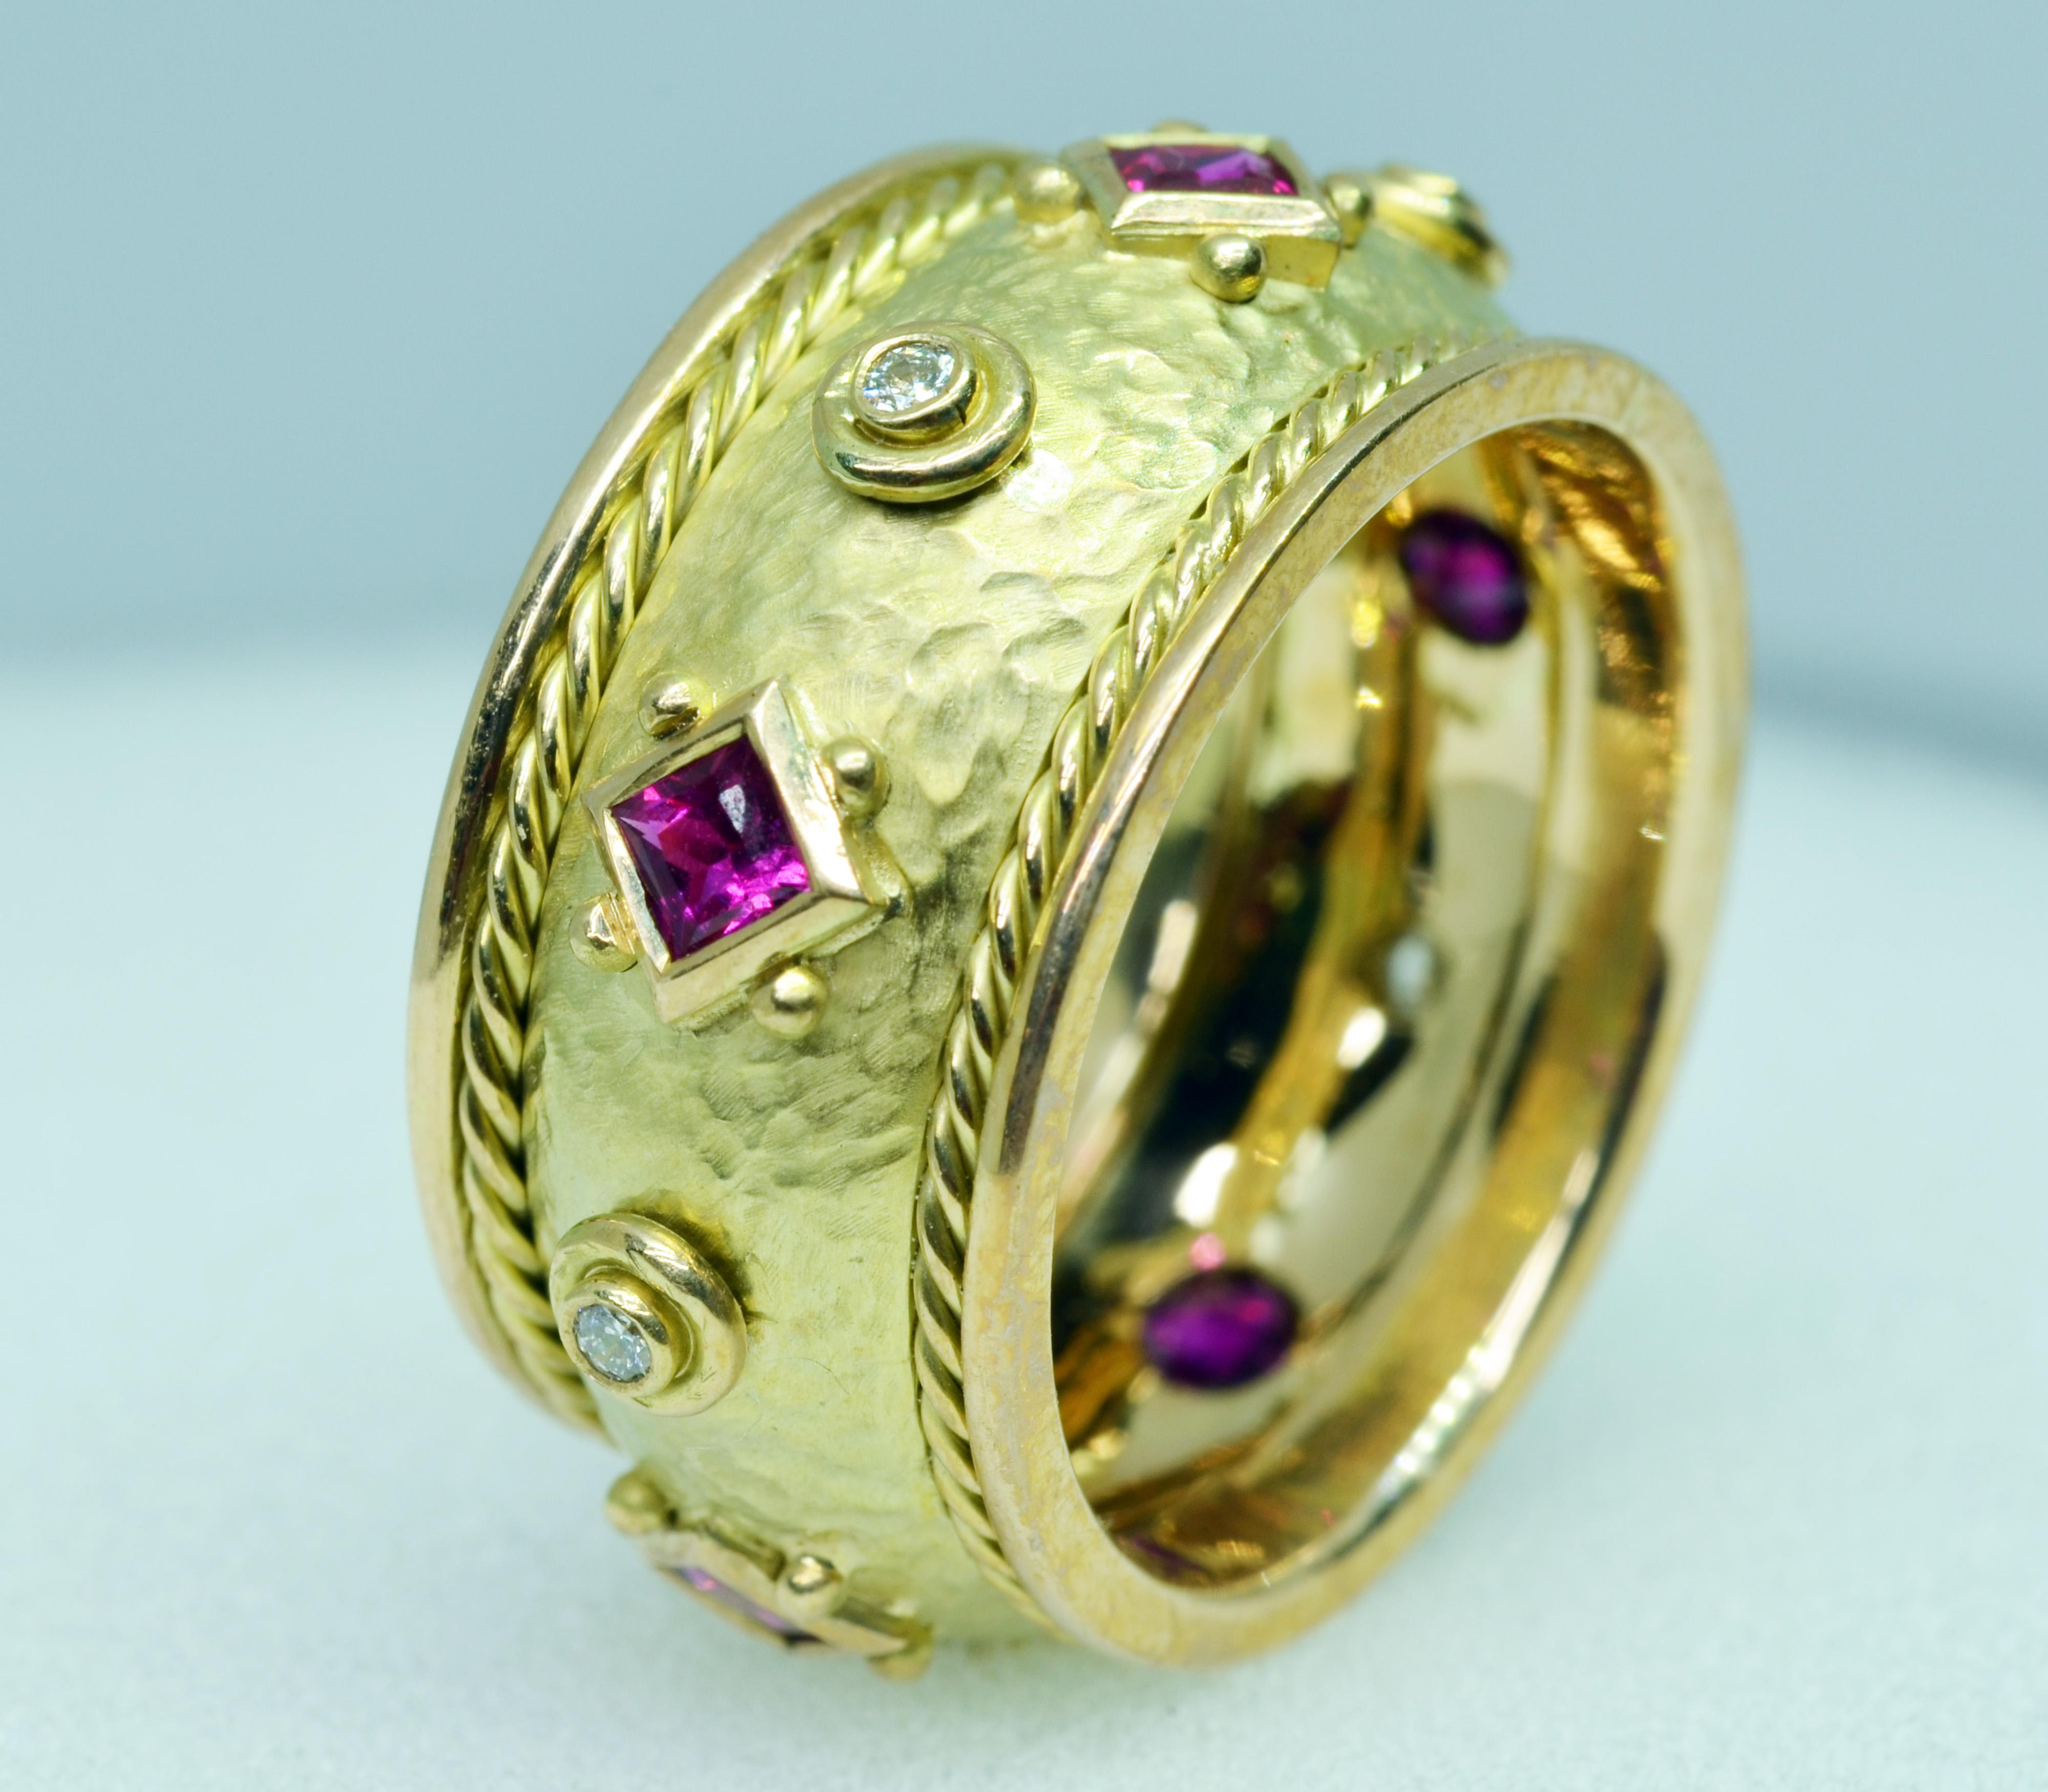 14 Karat Yellow Gold Handmade Ruby and Diamond Cigar Band.
This ring is handcrafted in 14Karat Yellow old and set with five Princess cut Rubies and five small Diamonds. The background is textured somewhat like leather. This ring can be custom made